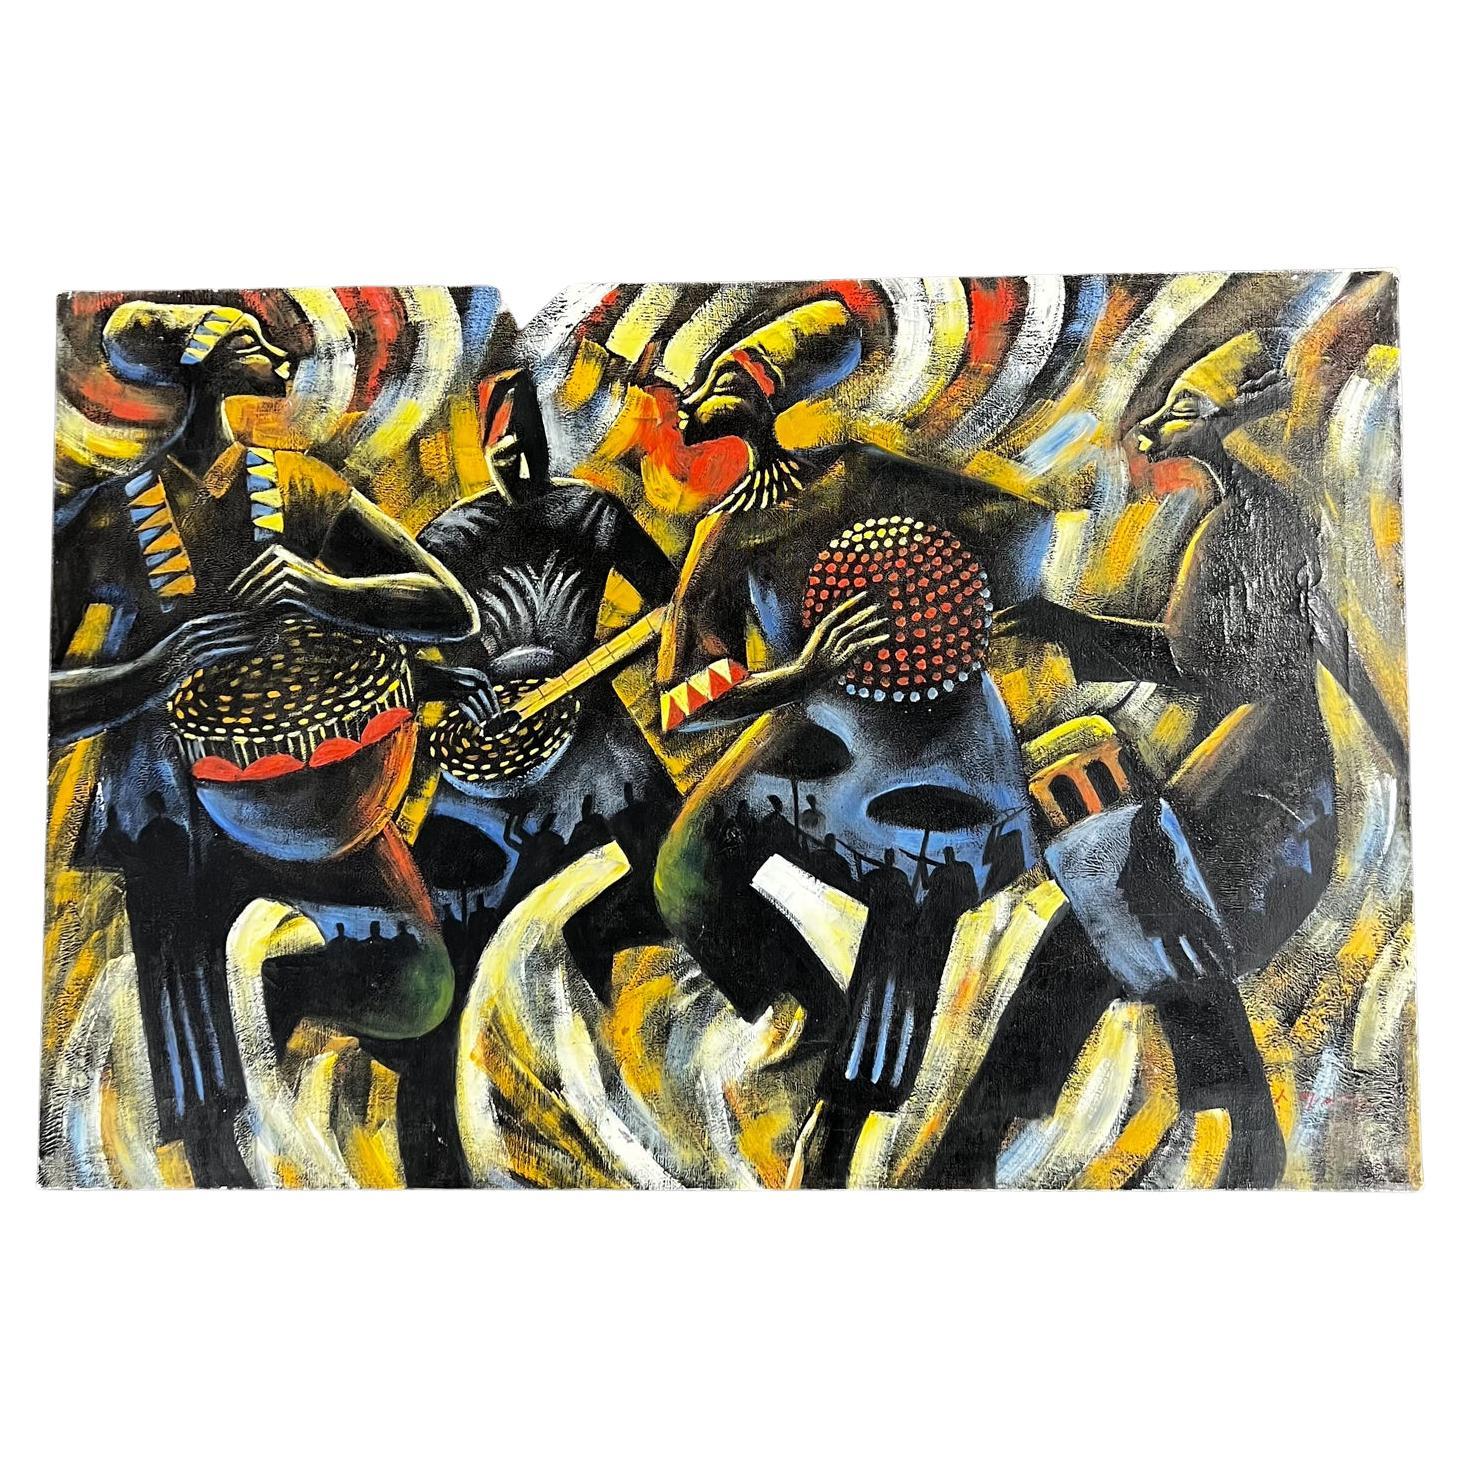 Vibrant African Musicians Artwork Oil on Canvas Signed